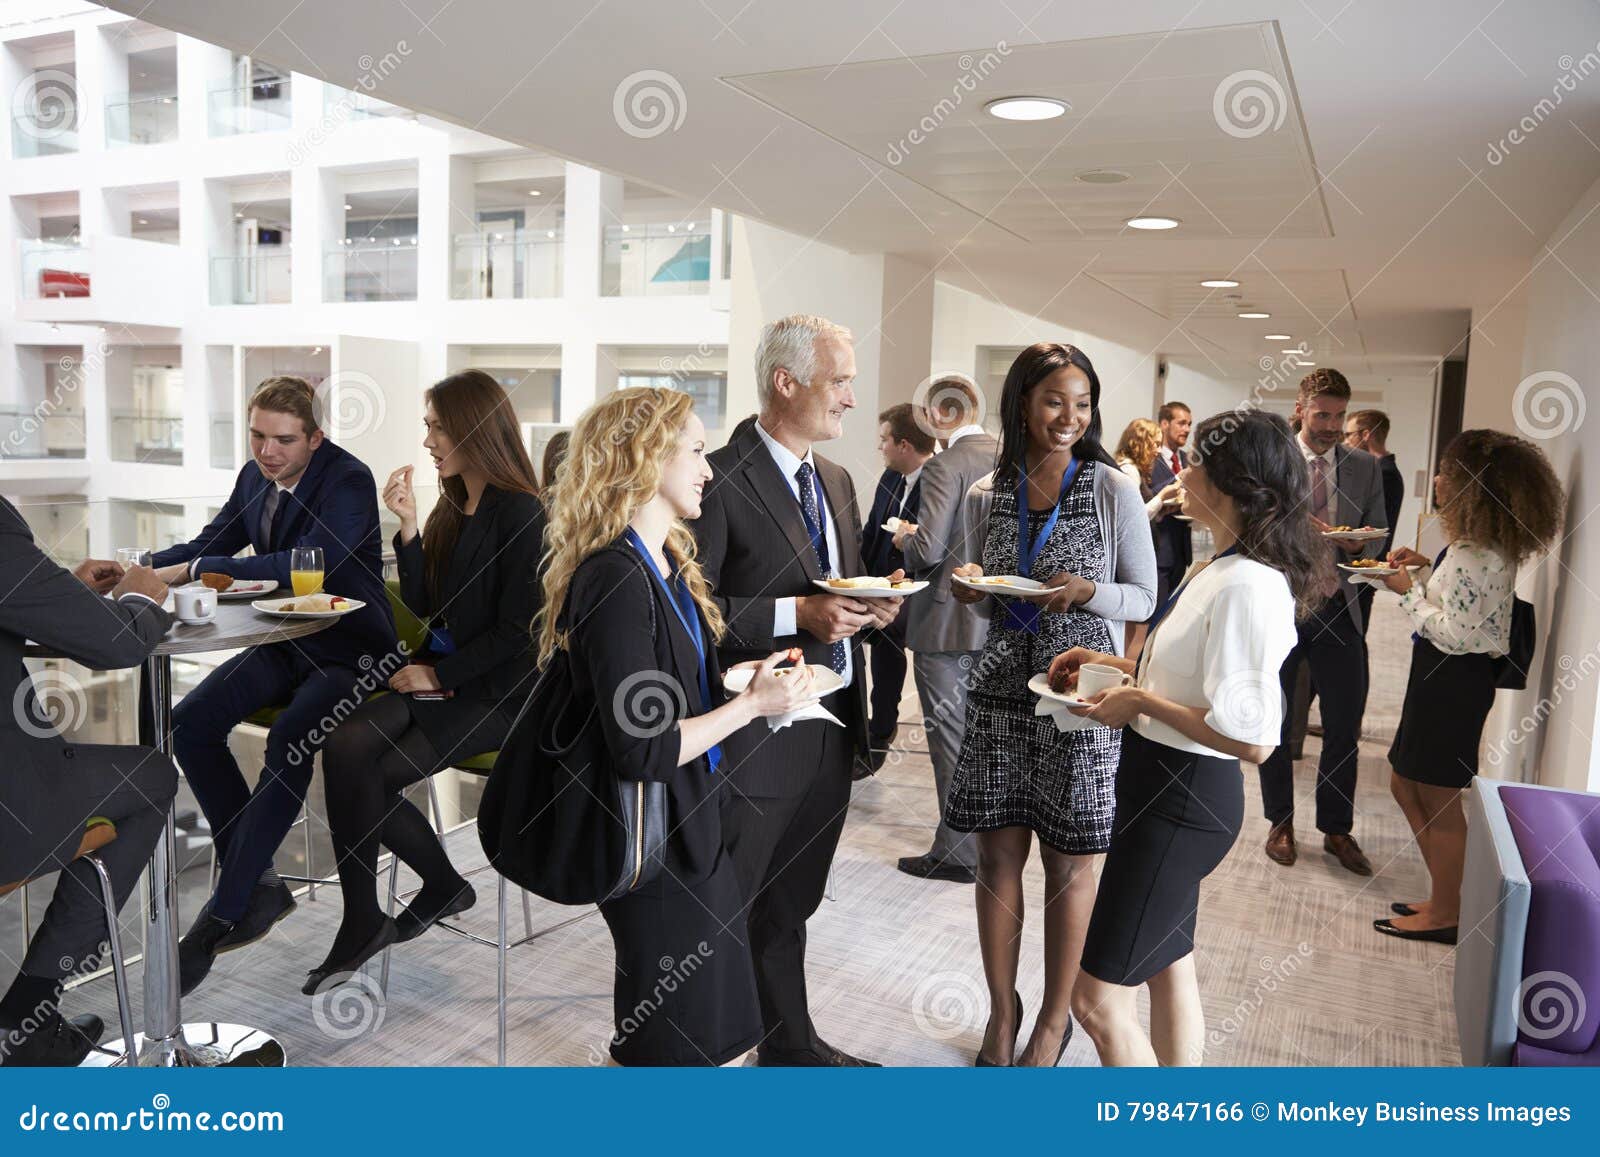 delegates networking during conference lunch break